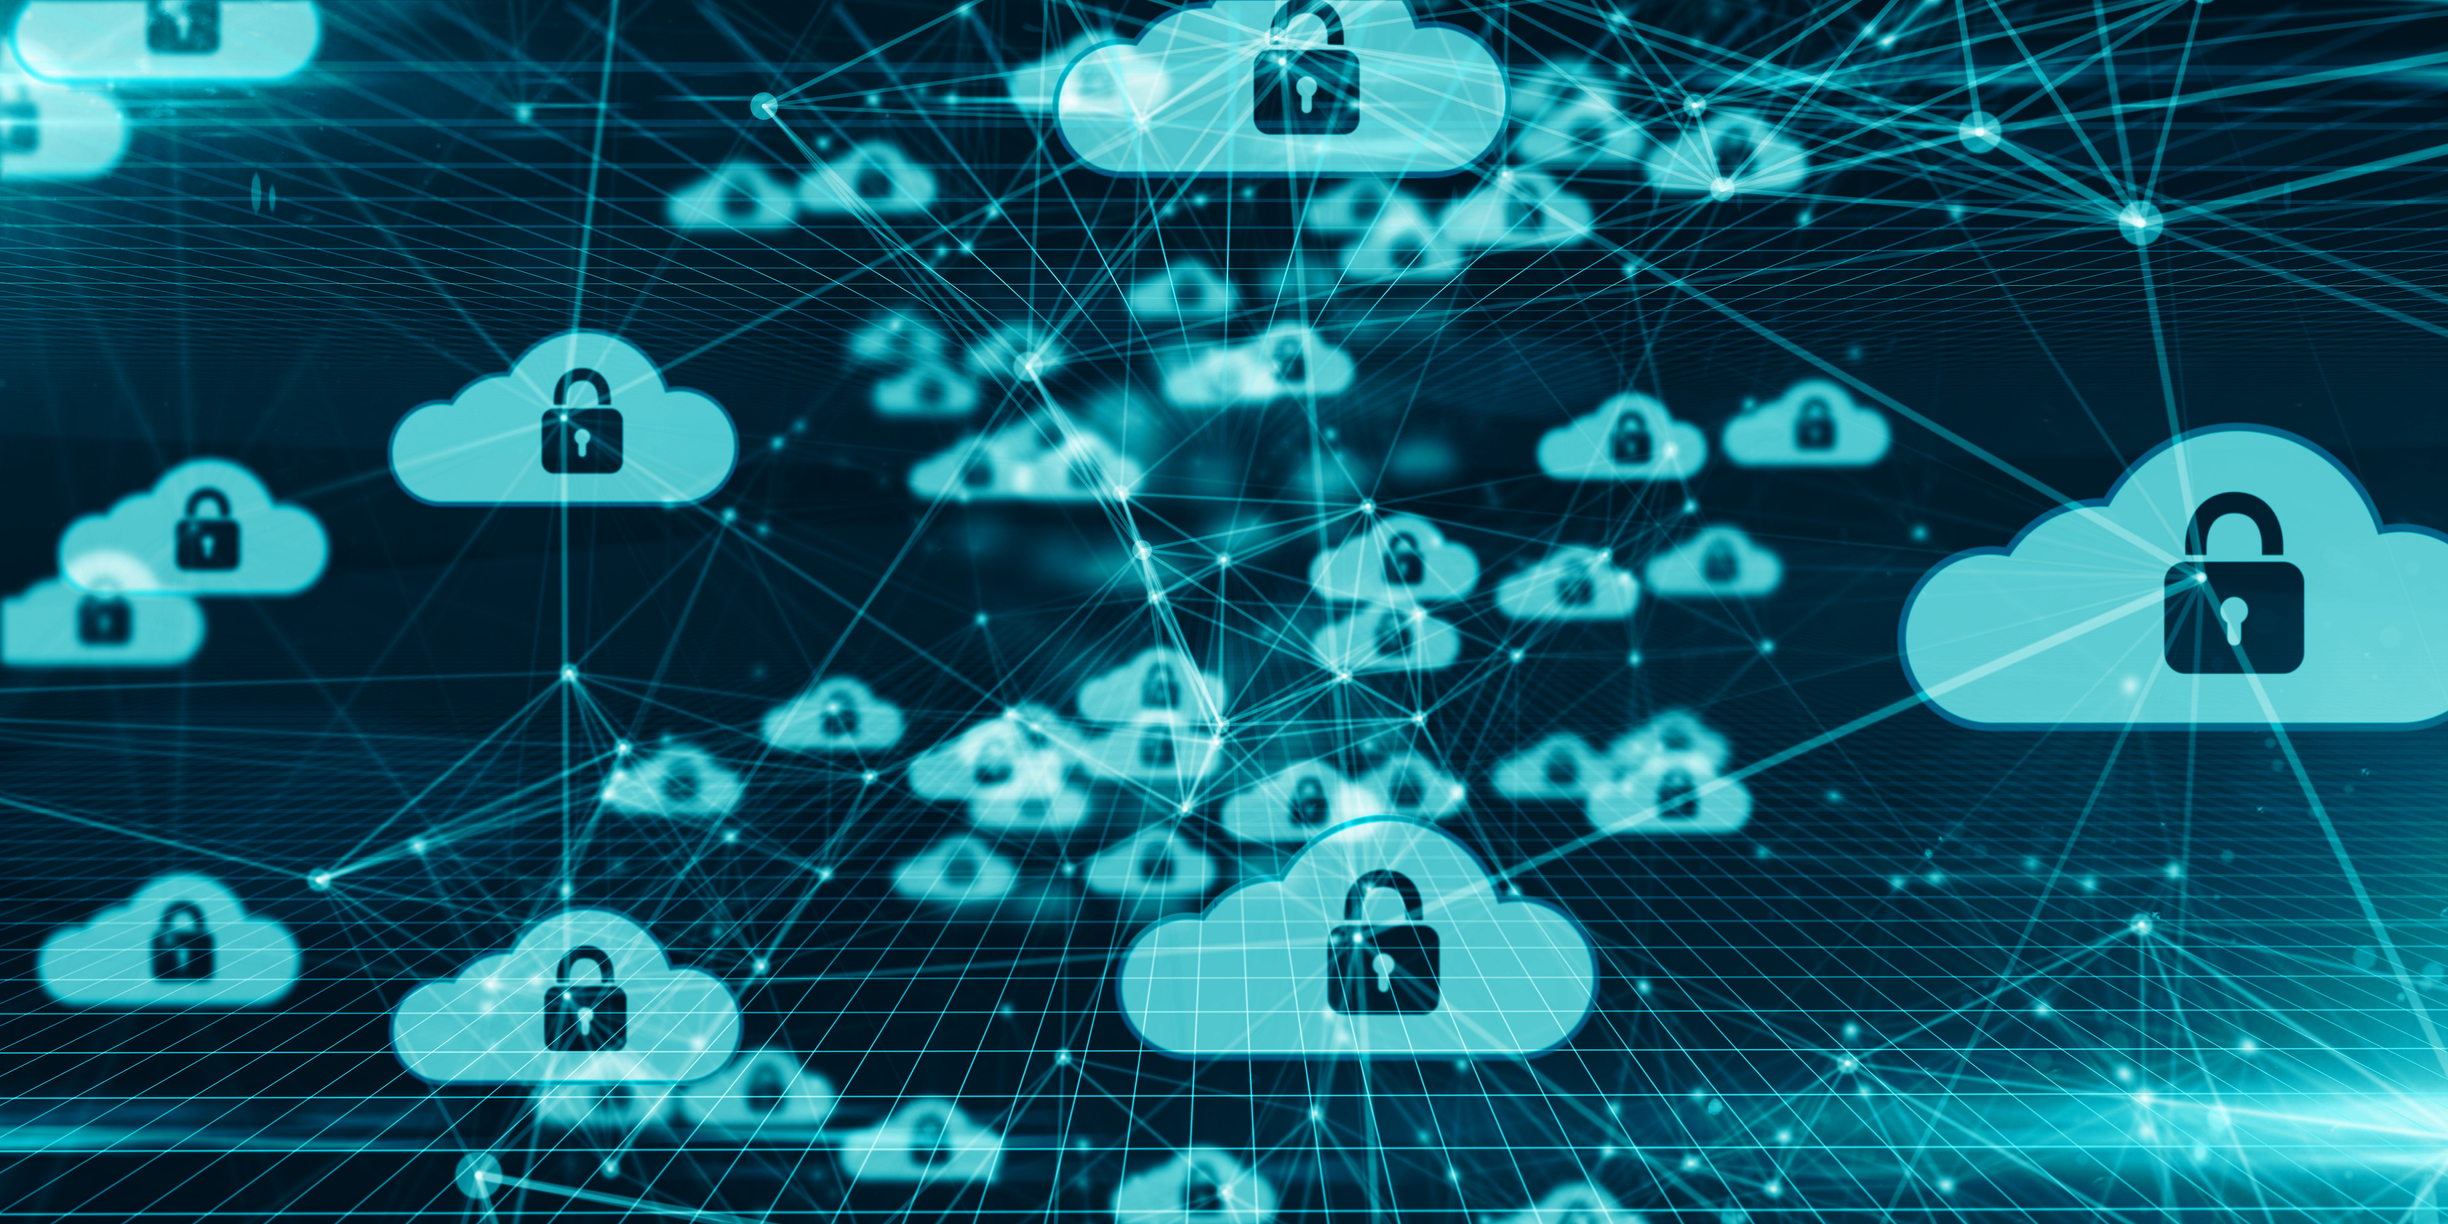 Abstract image of cloud icons and lock icons representing cybersecurity